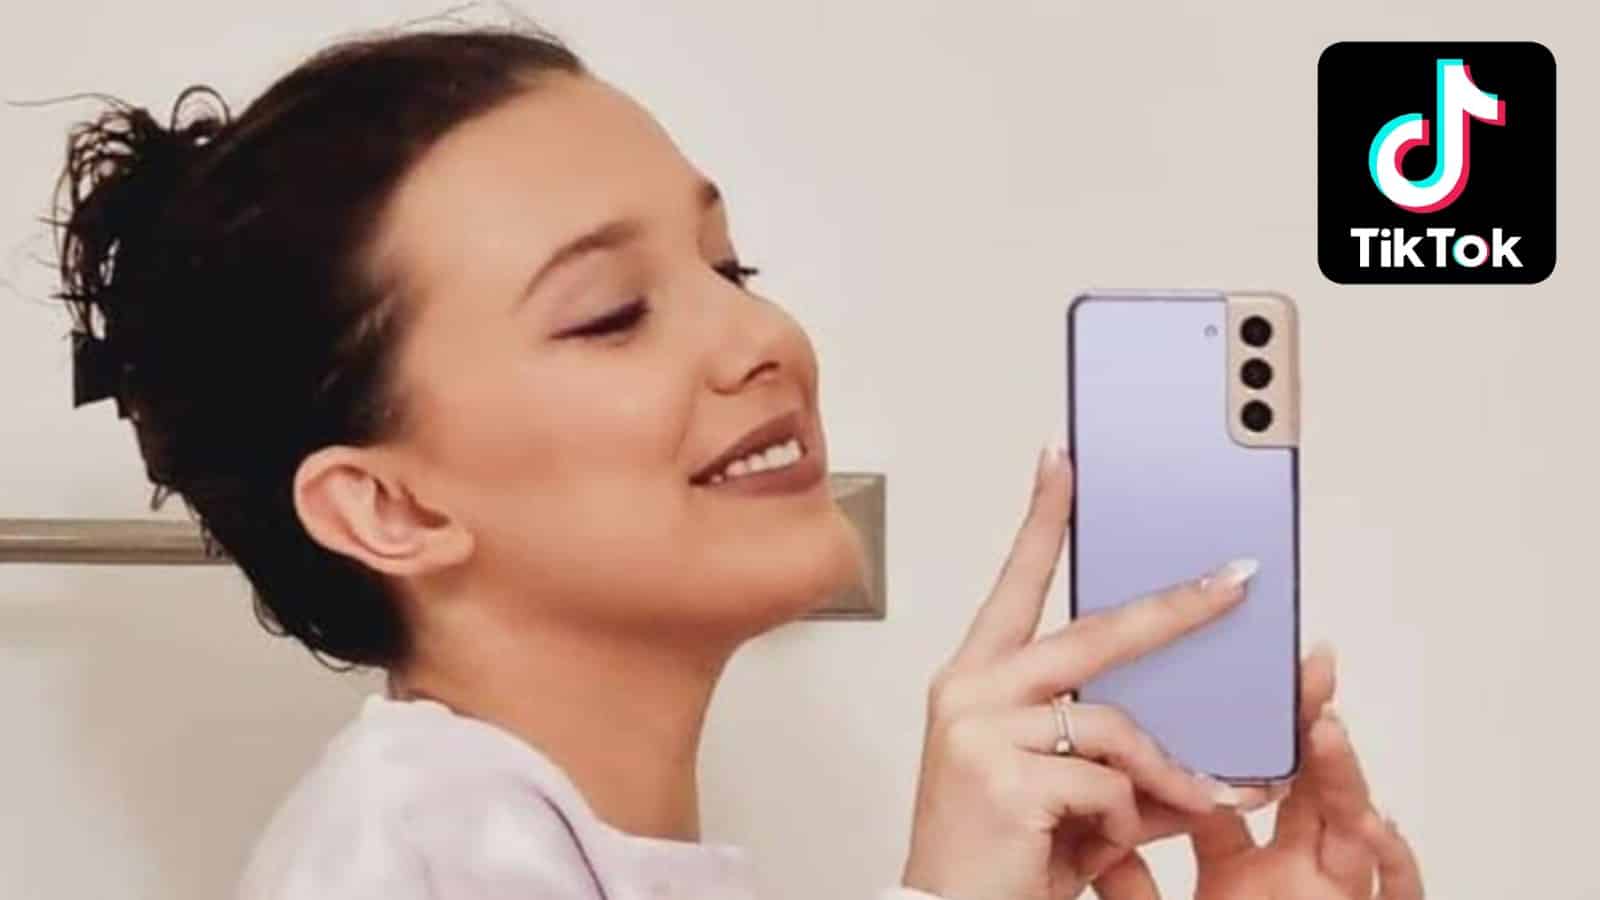 Millie Bobby Brown taking a selfie with her phone